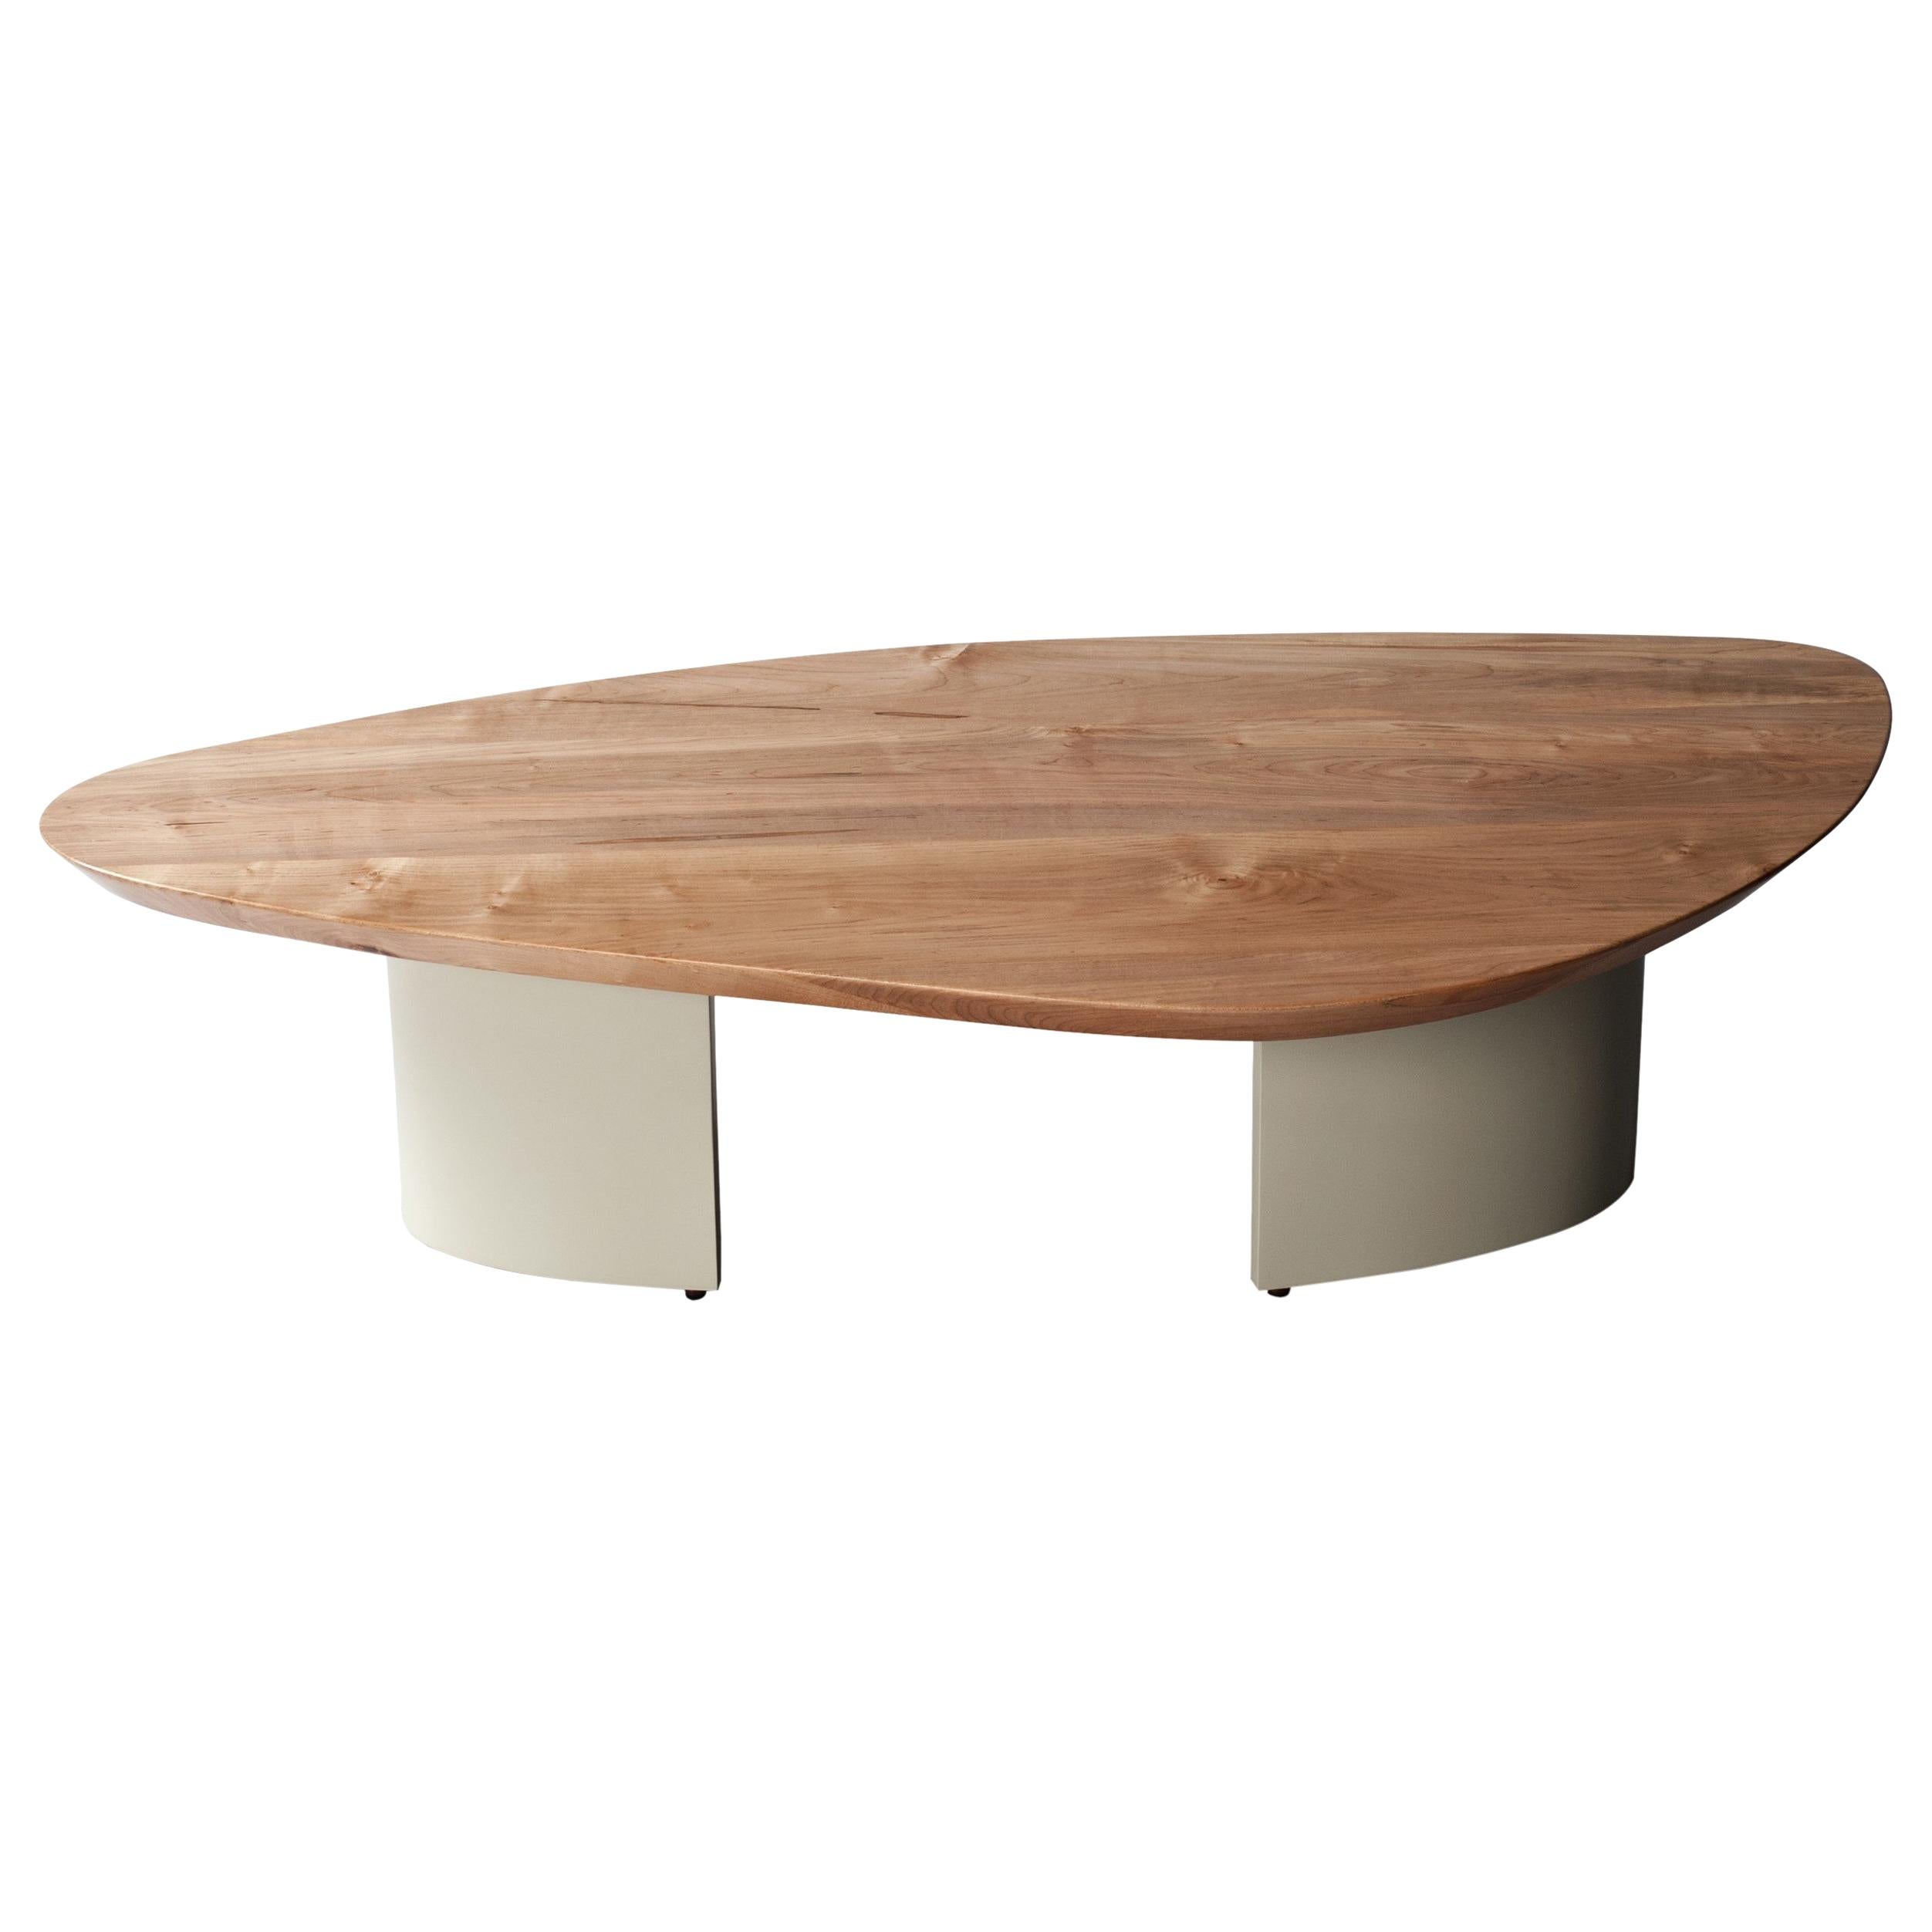 Ledge Coffee Table by DeMuro Das in Solid Maple with Pebble Grey Lacquered Base